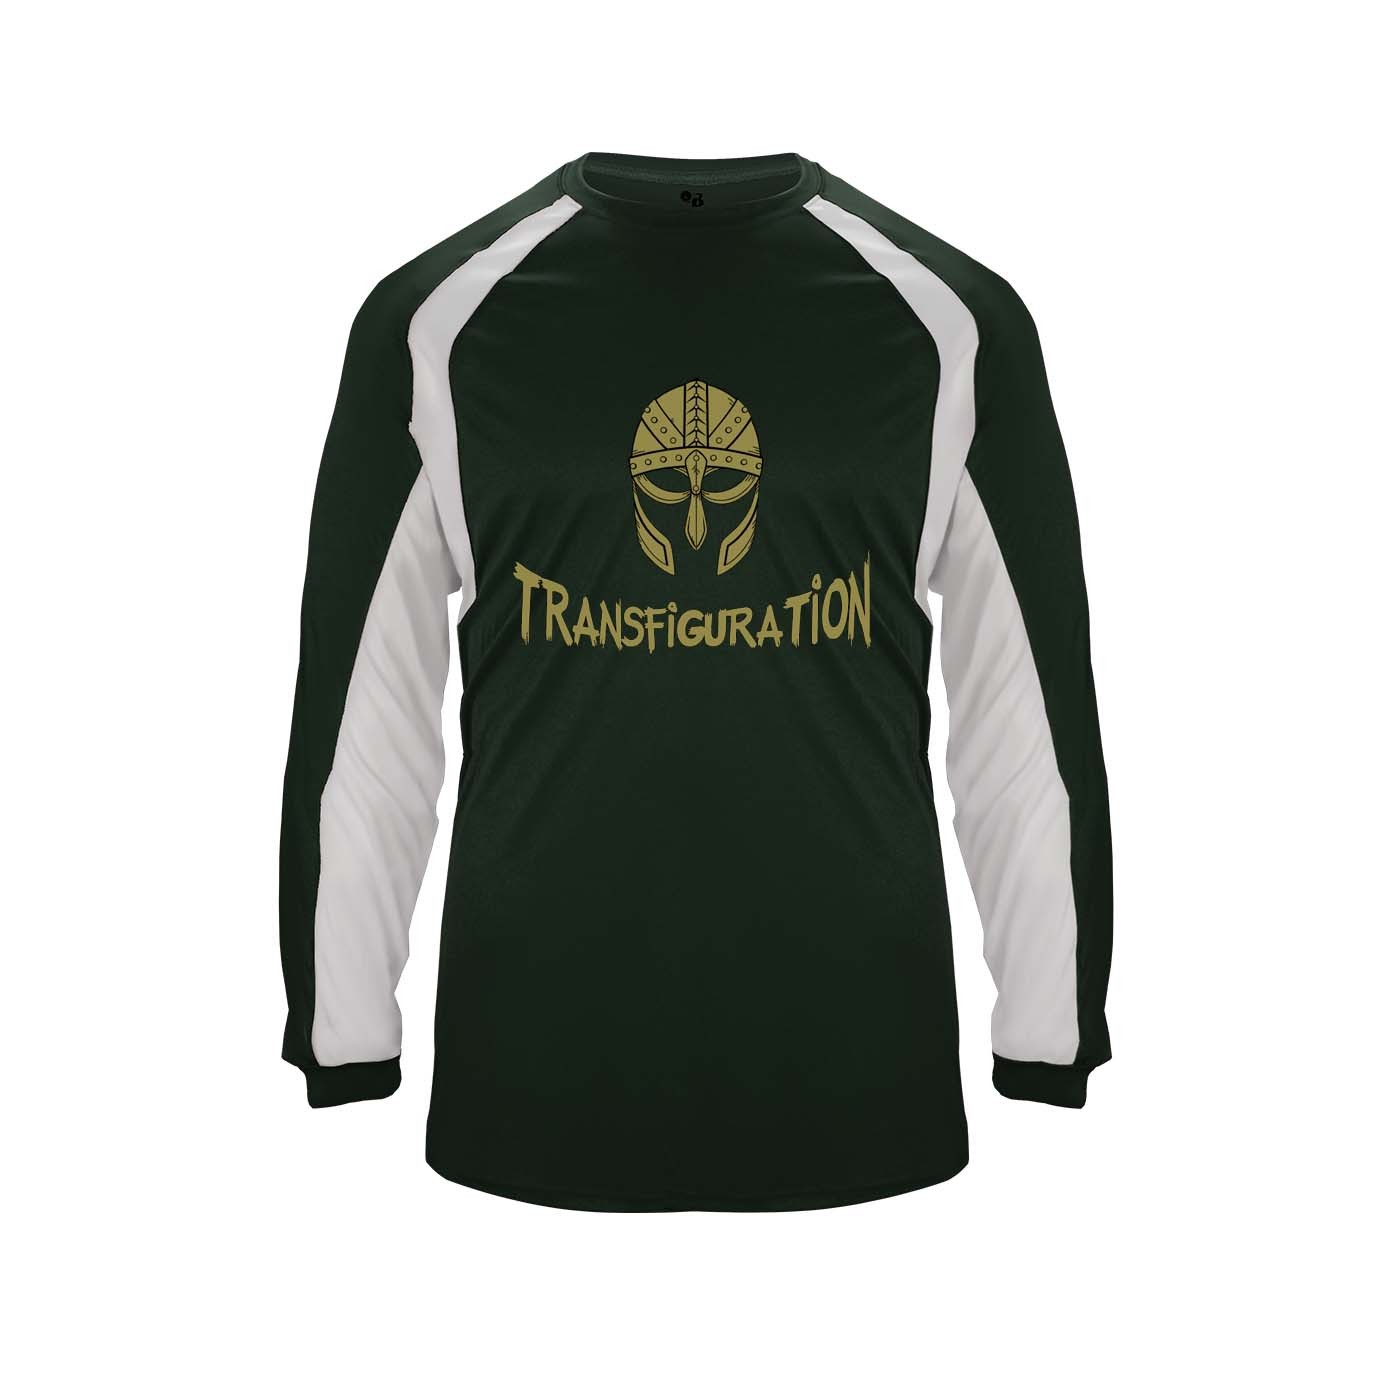 Transfiguration Spirit Hook L/S T-Shirt w/ Helm Logo - Please Allow 2-3 Weeks for Delivery